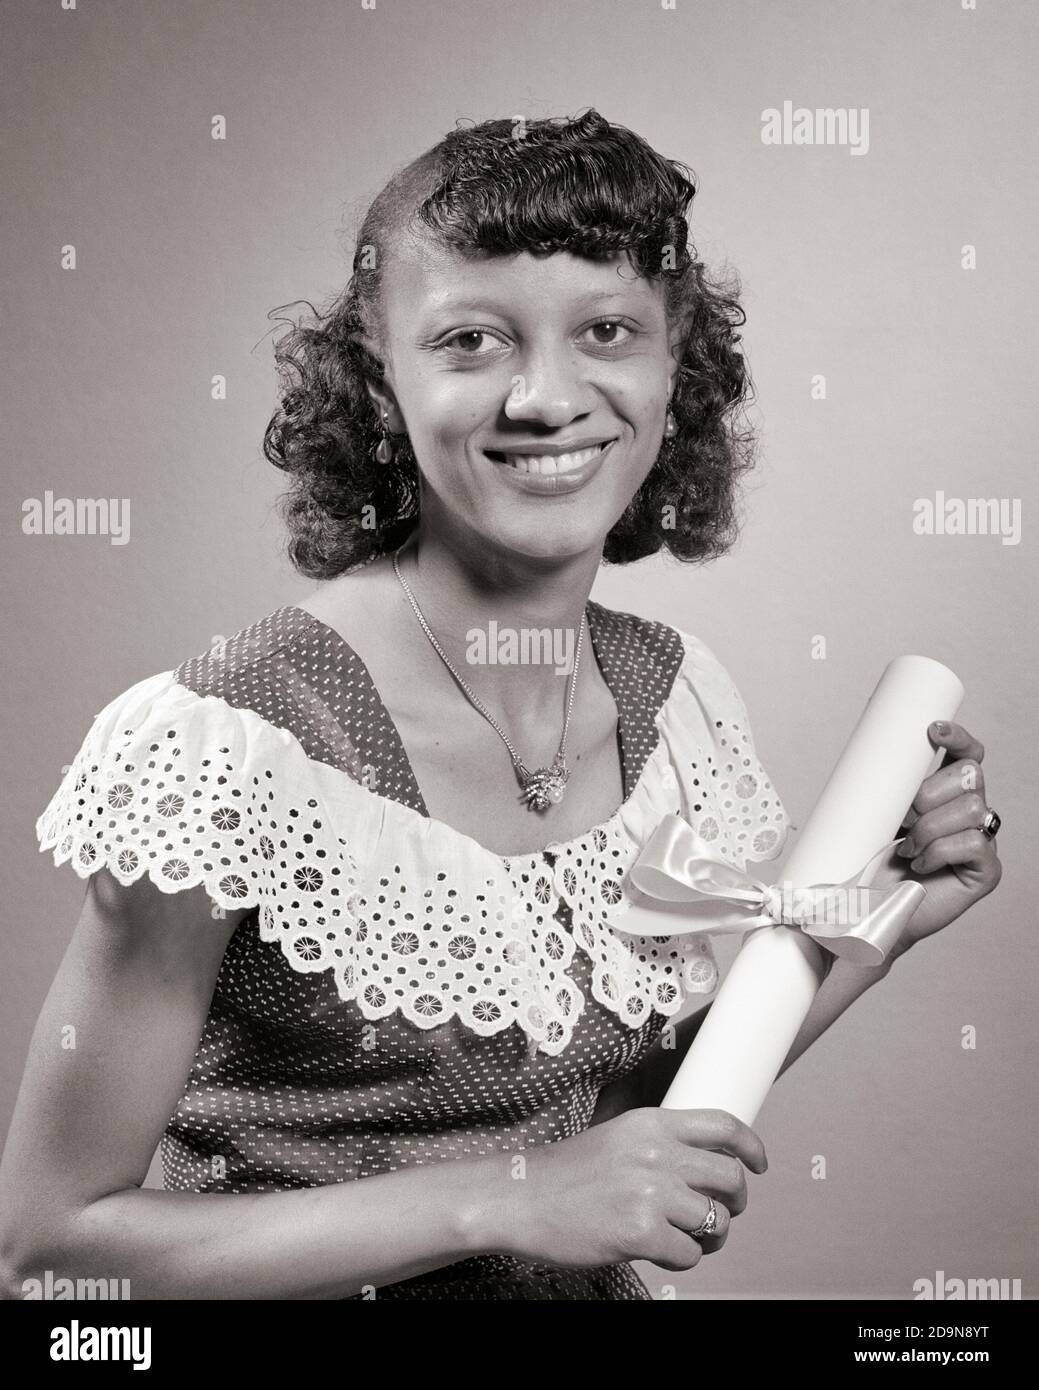 African American Woman 1950s High Resolution Stock Photography And Images Alamy